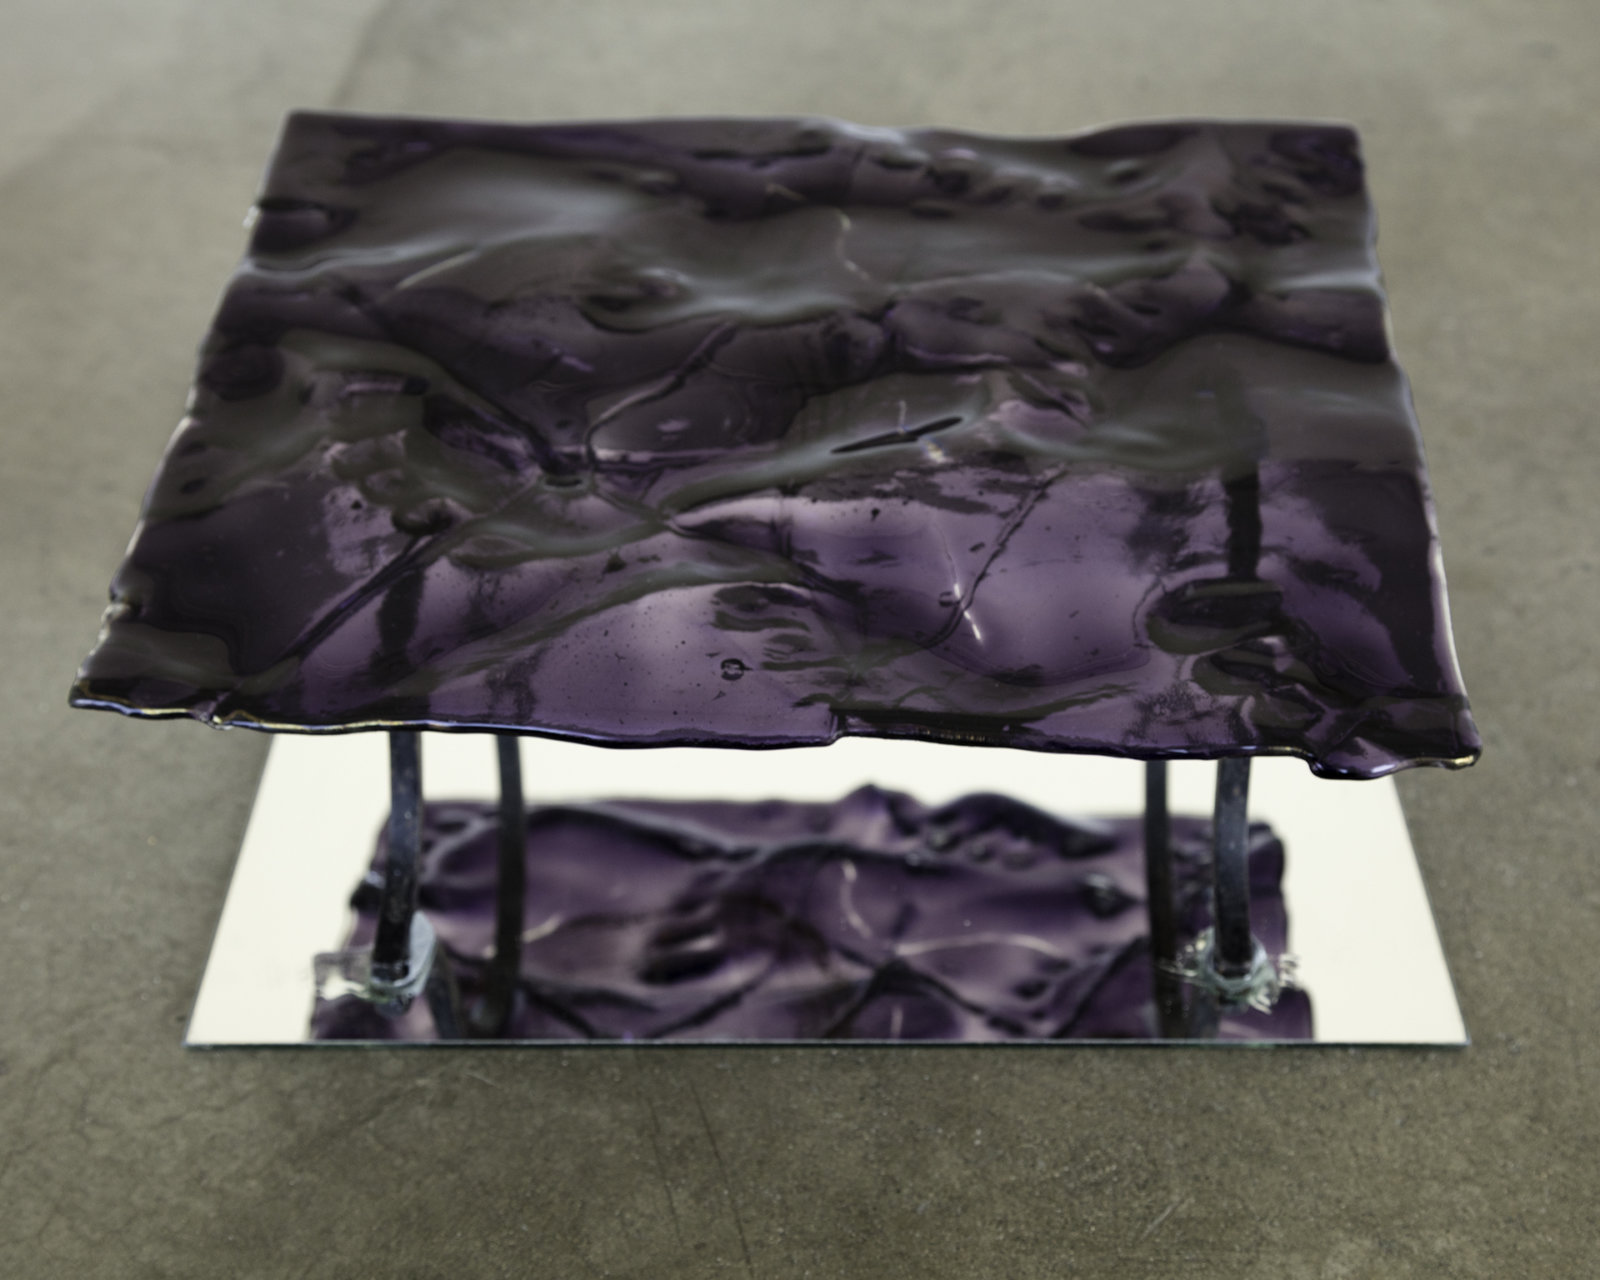 Kasper Feyrer, New Pedestrians, 2017, violet glass, wrought iron, mirror, dimensions variable